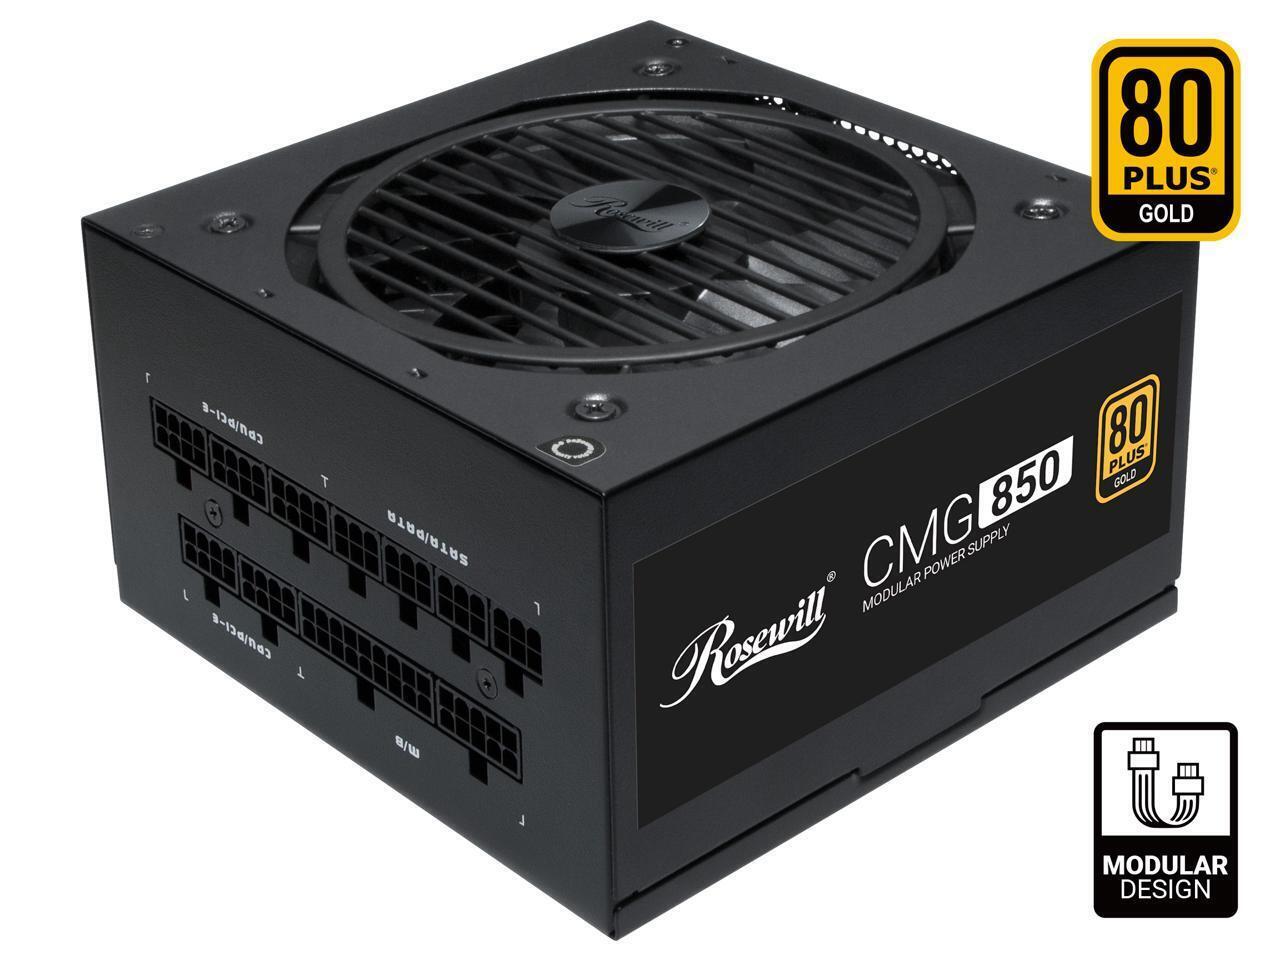 Rosewill CMG Series, CMG850, 850W Fully Modular Power Supply, 80 PLUS GOLD Certi